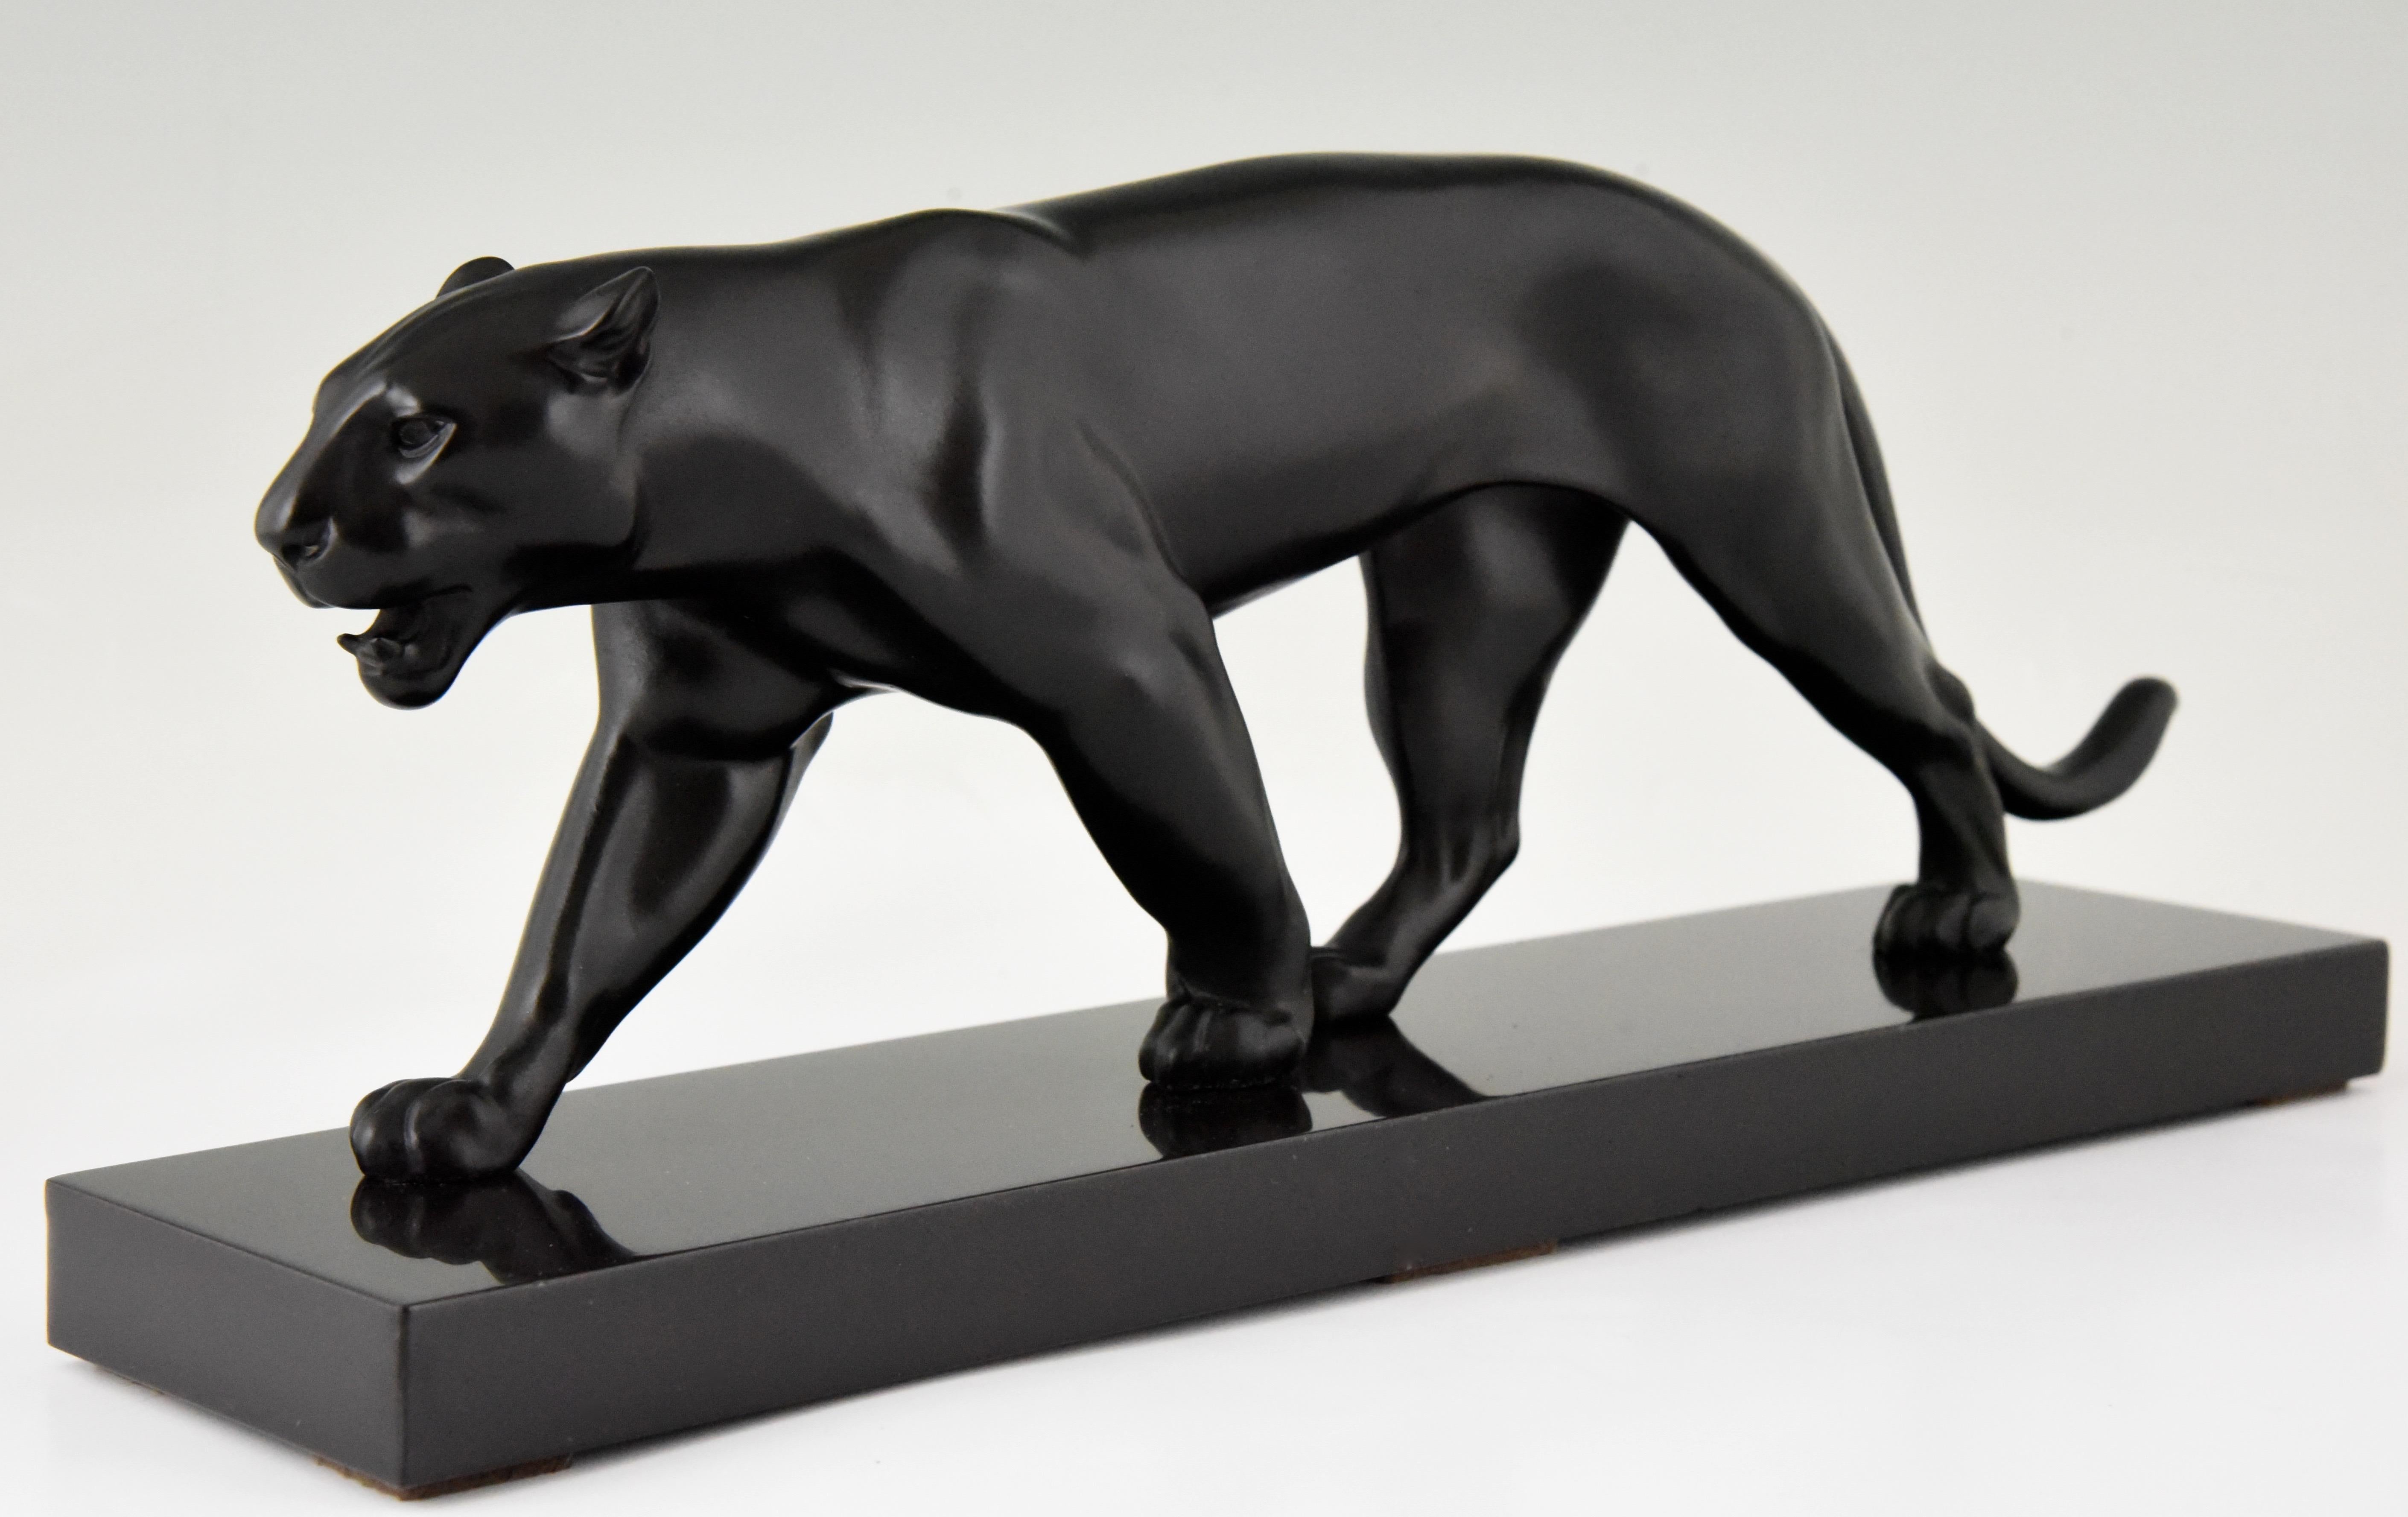 Art Deco sculpture of a walking panther by the famous French artist Max Le Verrier. Patinated art metal on a Belgian black marble base, circa 1930. 

“Statuettes of the Art Deco period” Alberto Shayo. ?“Art Deco sculpture” by Victor Arwas,